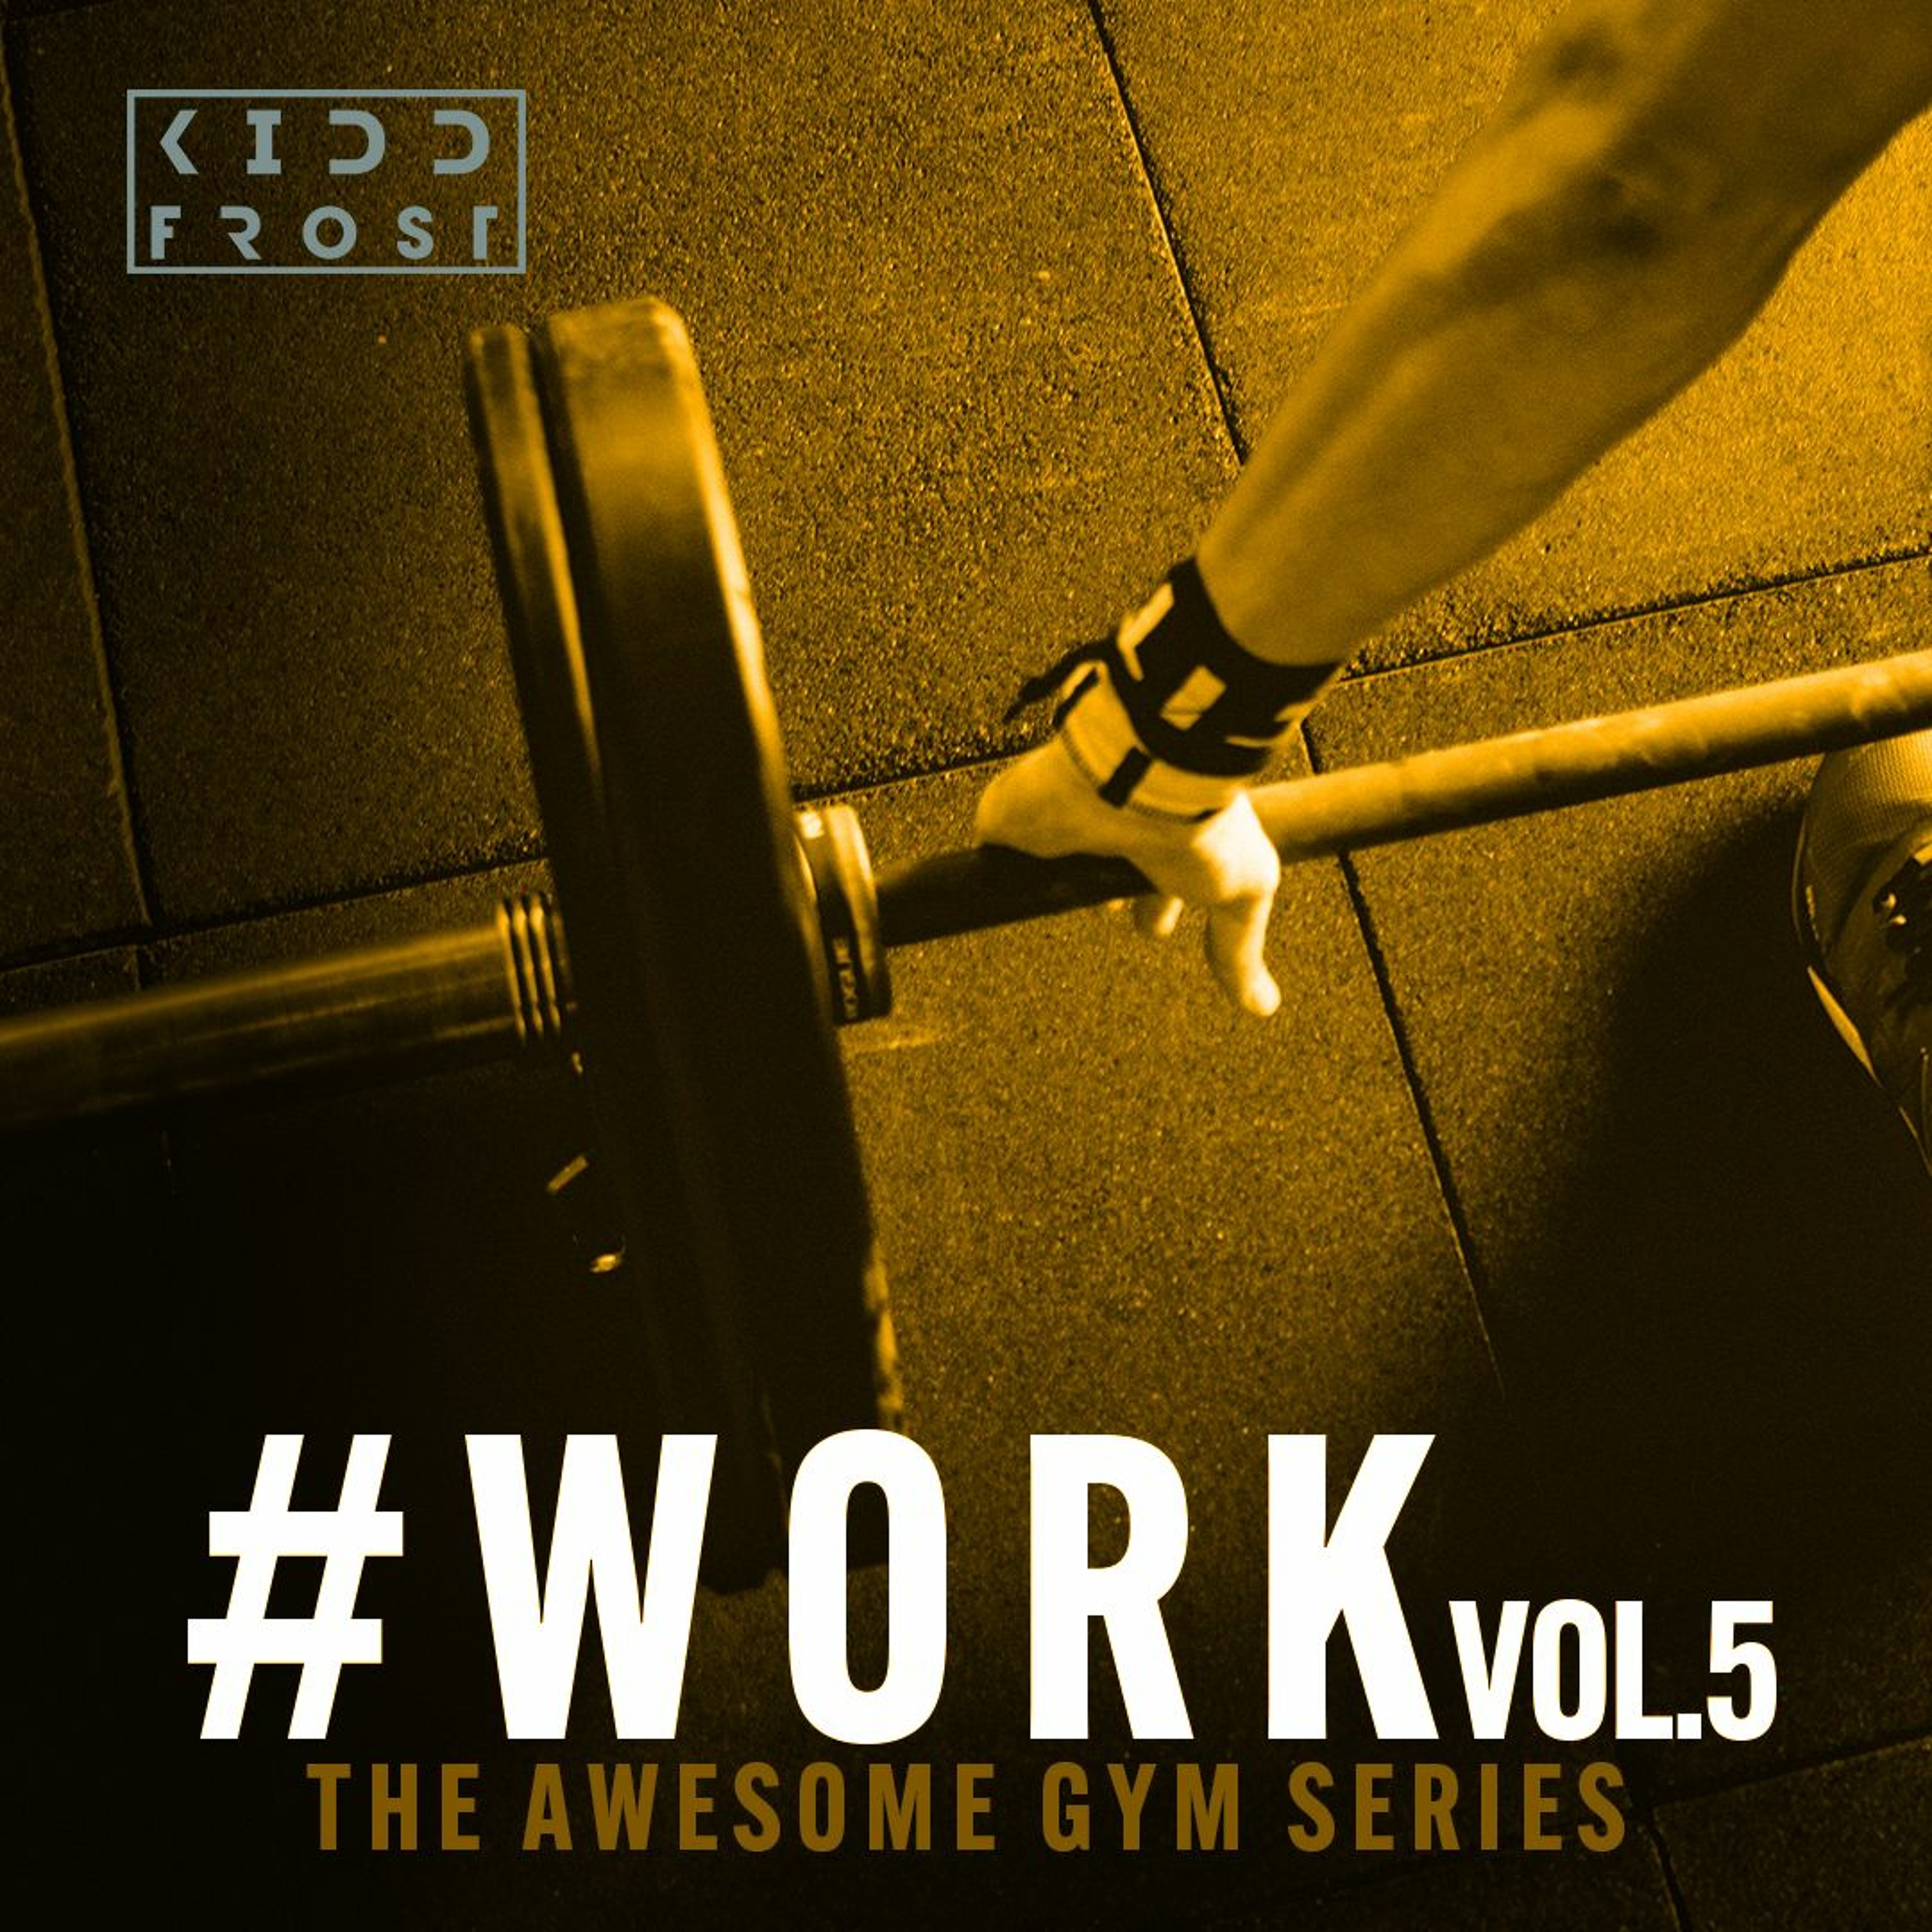 #Work Vol.5 - TBT(80s) 🔥🔥 | The Awesome Gym Series (Phil Collins, The Police, Queen & MORE!)